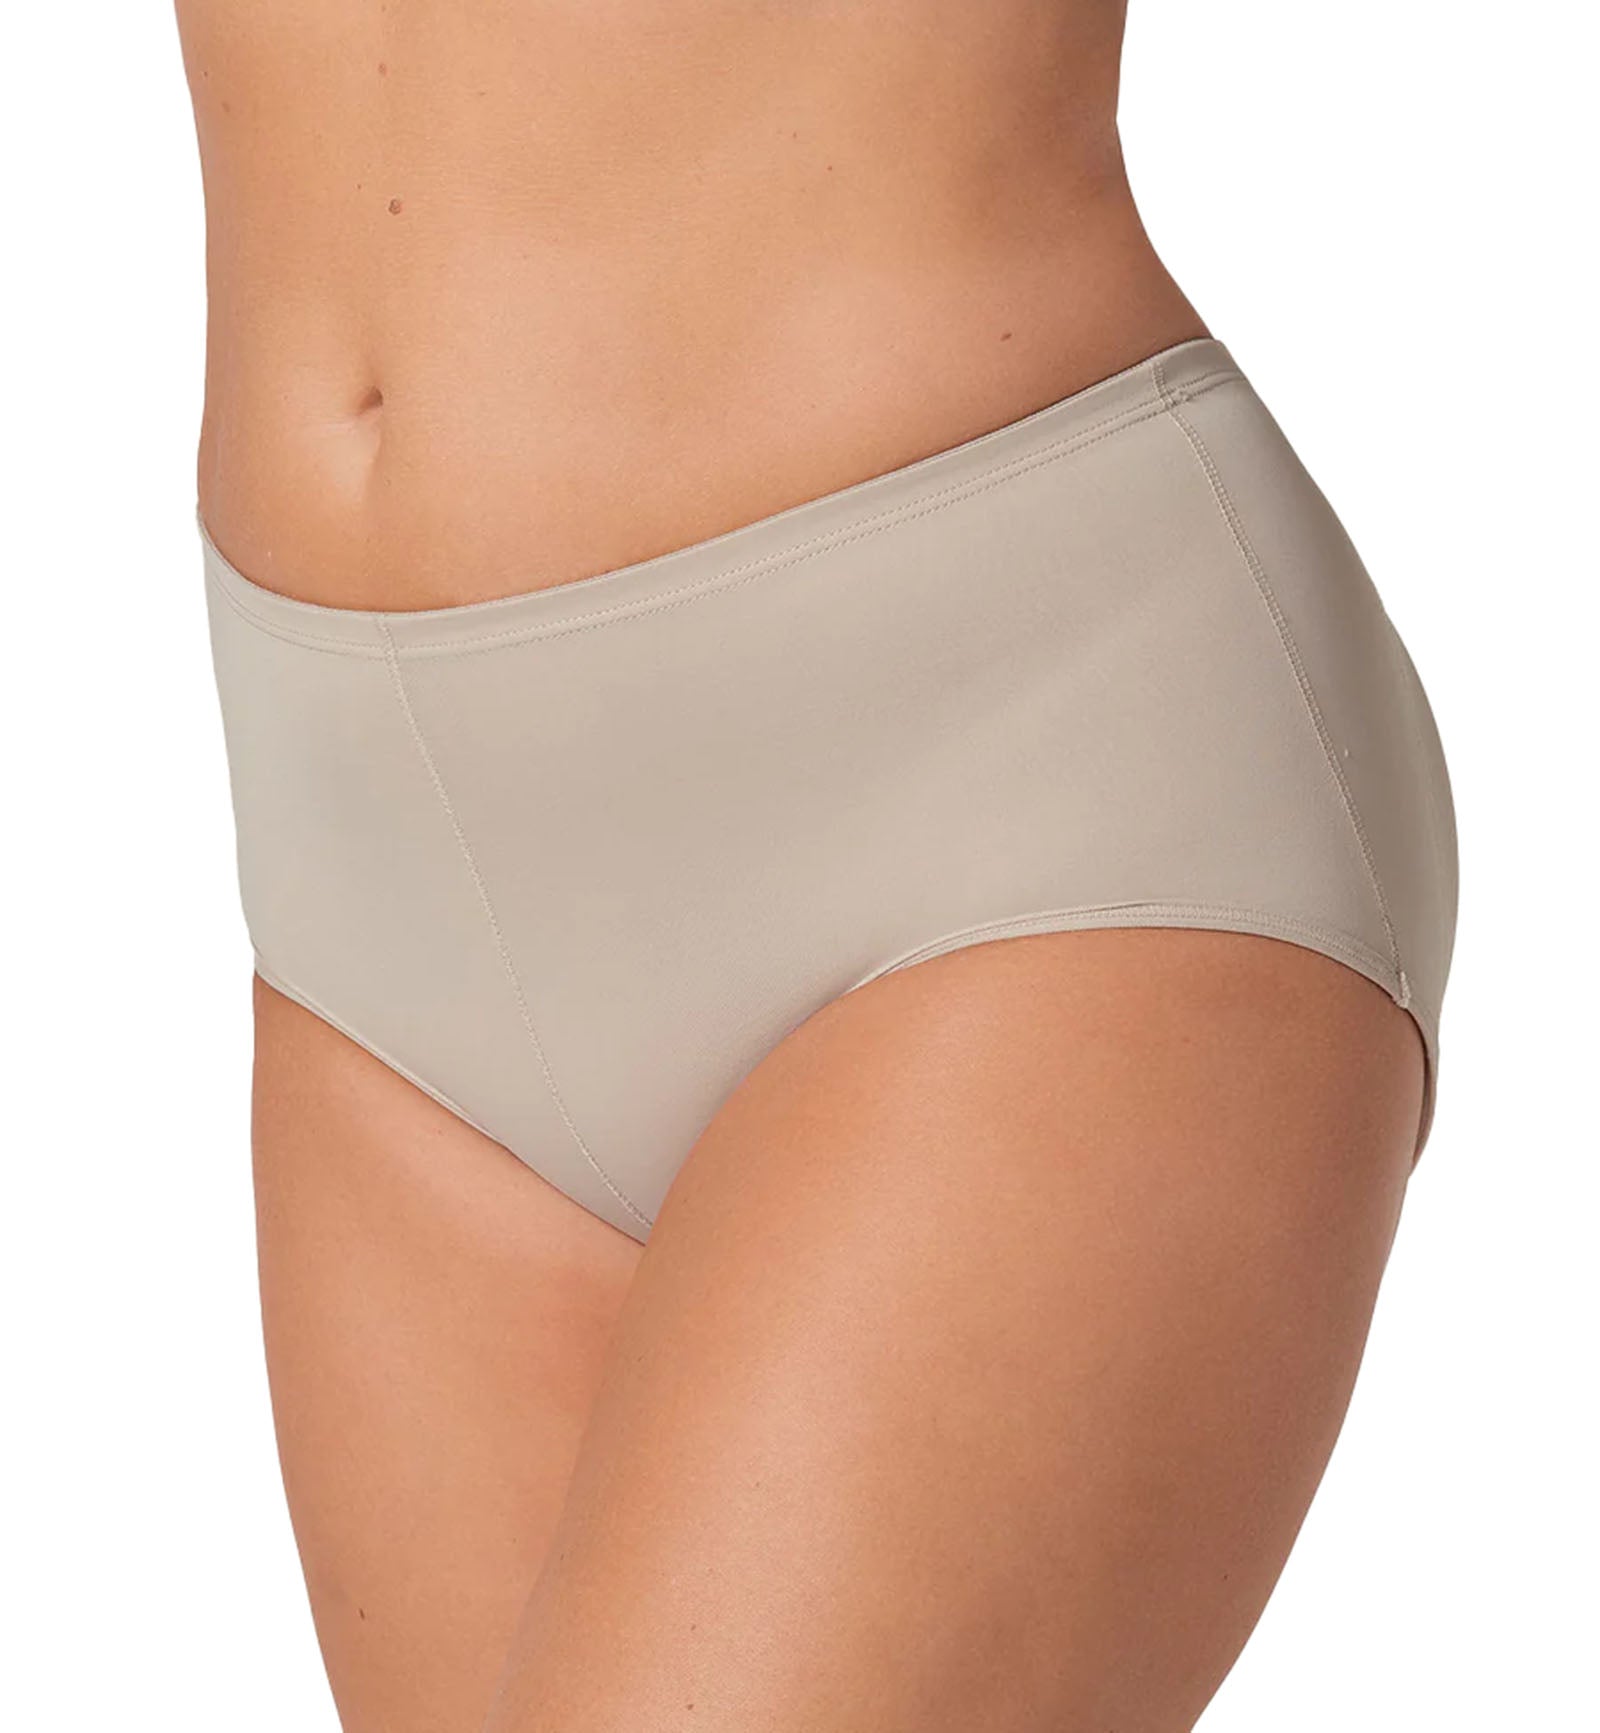 Leonisa Magic Instant Butt Lift Padded Panty (012688),Small,Nude - Nude,Small